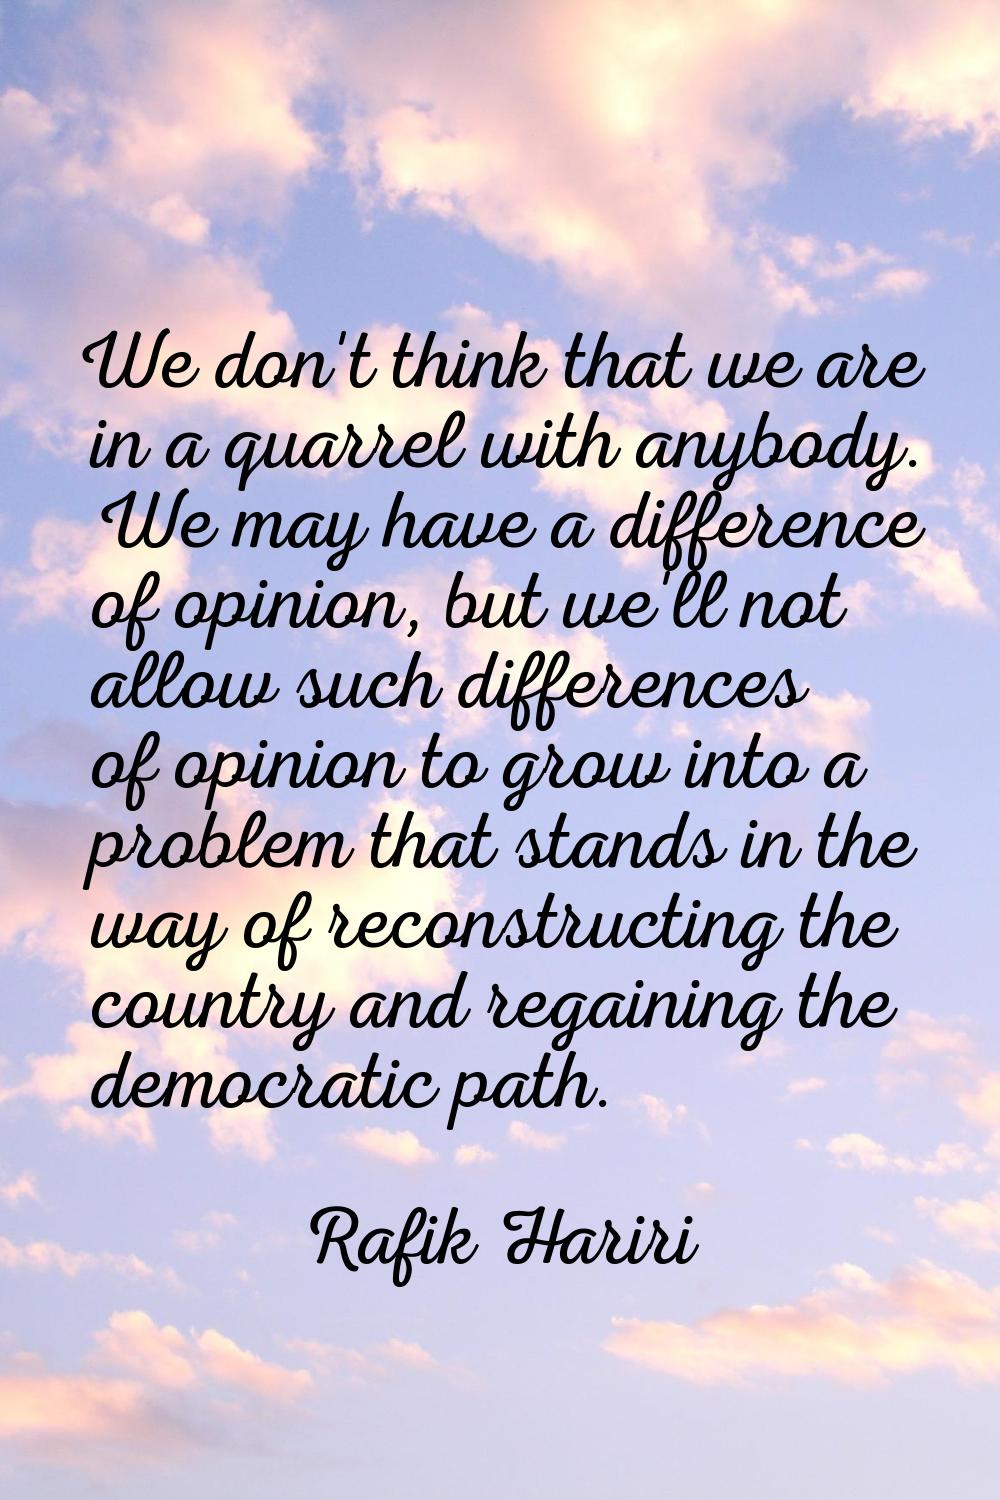 We don't think that we are in a quarrel with anybody. We may have a difference of opinion, but we'l